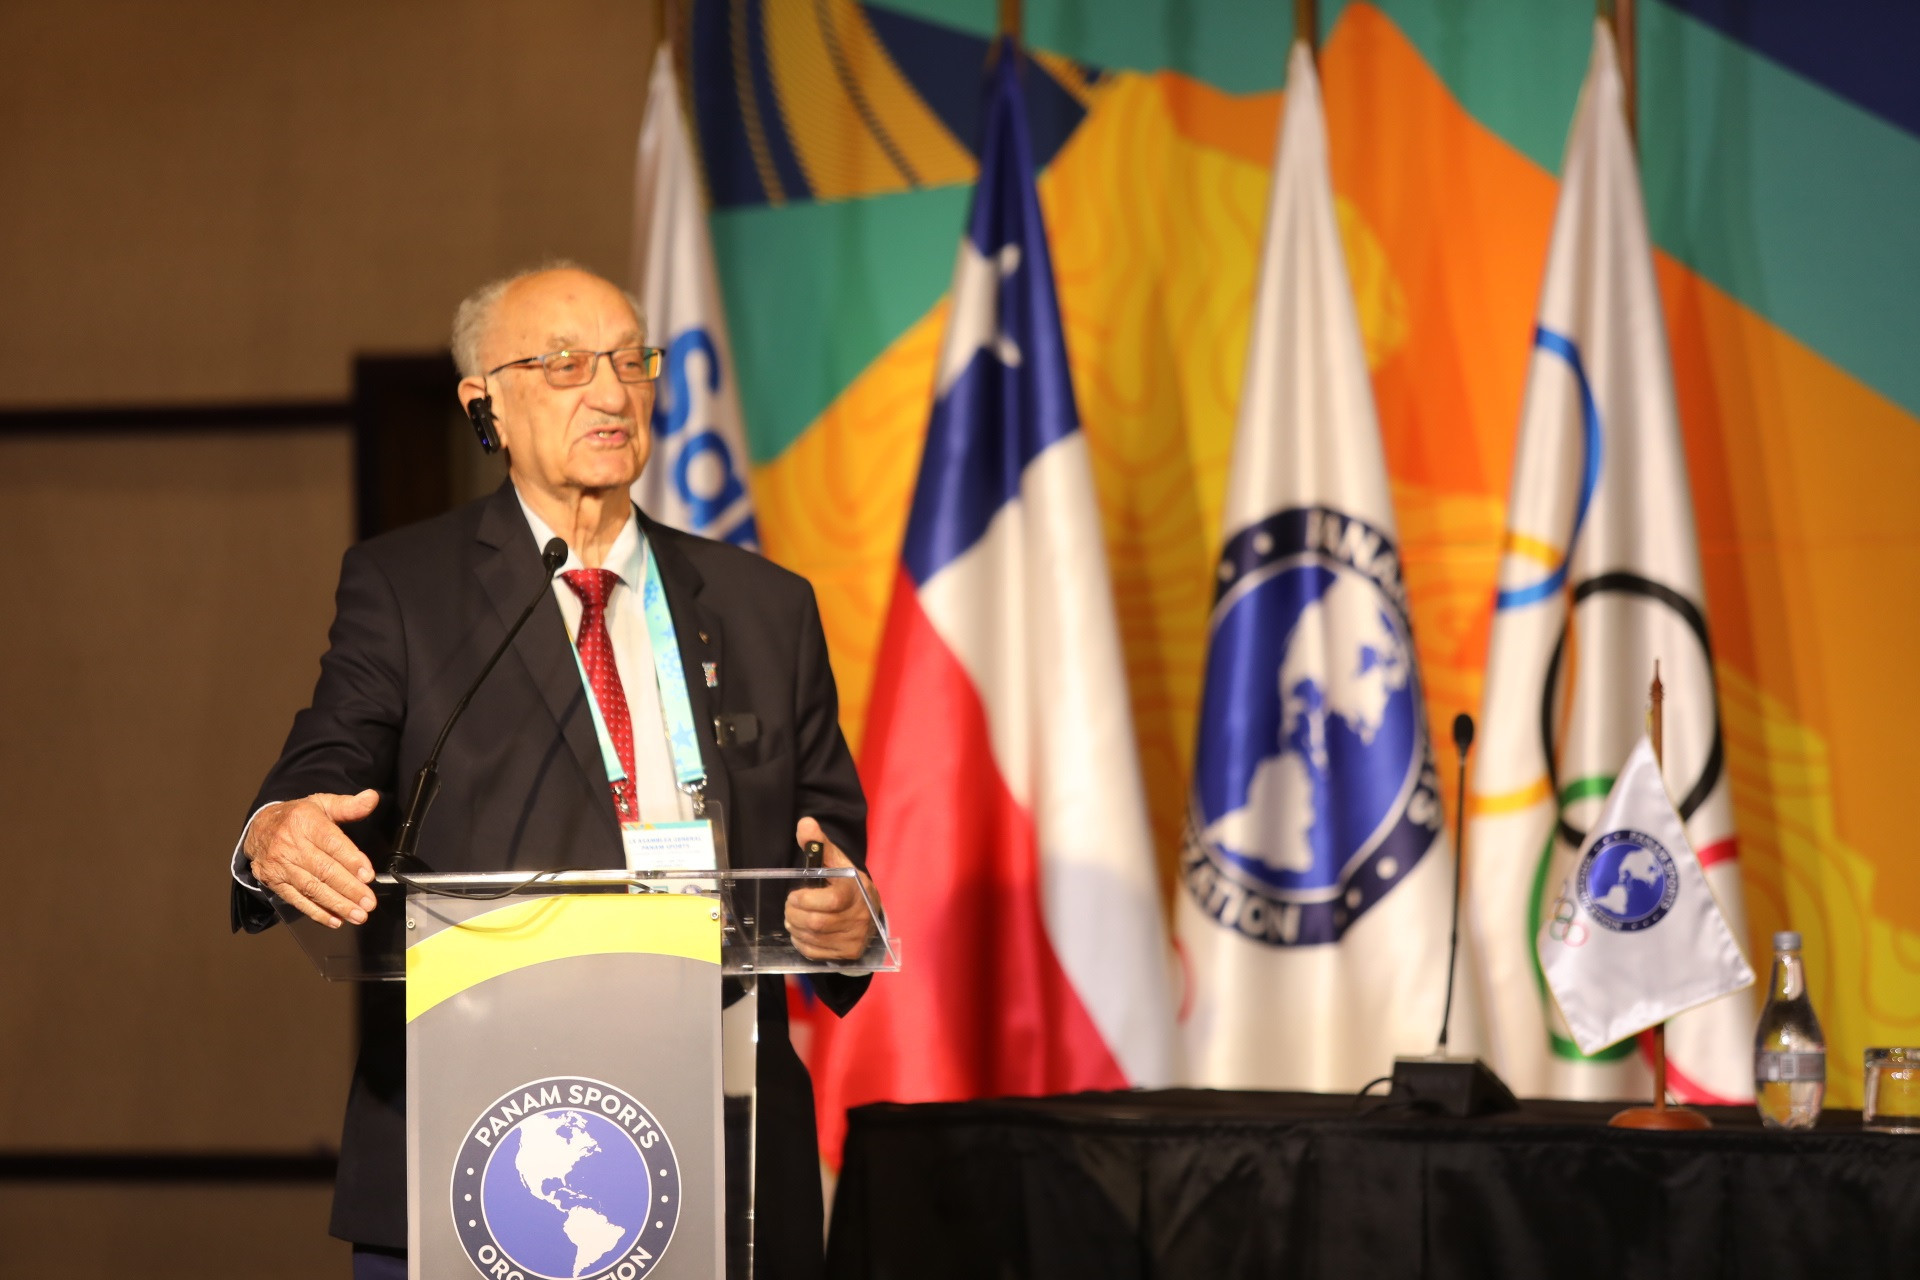 Michael Fennell, head of the Panam Sports’ Technical Commission for Cali 2021, heaped praise on organisers of the first-ever Junior Pan American Games ©Panam Sports